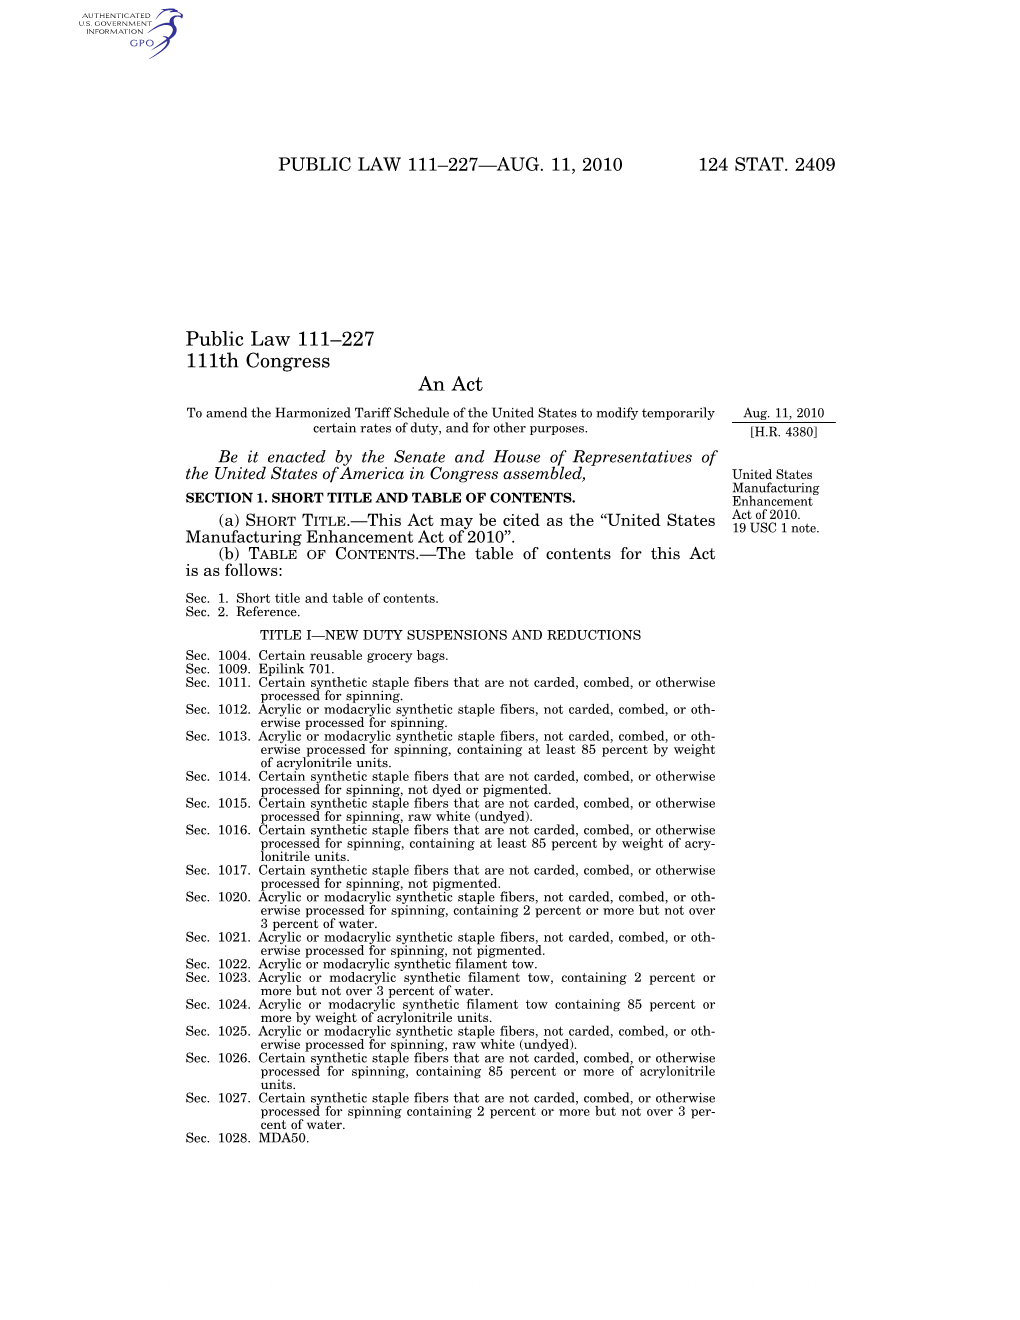 Public Law 111–227 111Th Congress an Act to Amend the Harmonized Tariff Schedule of the United States to Modify Temporarily Aug